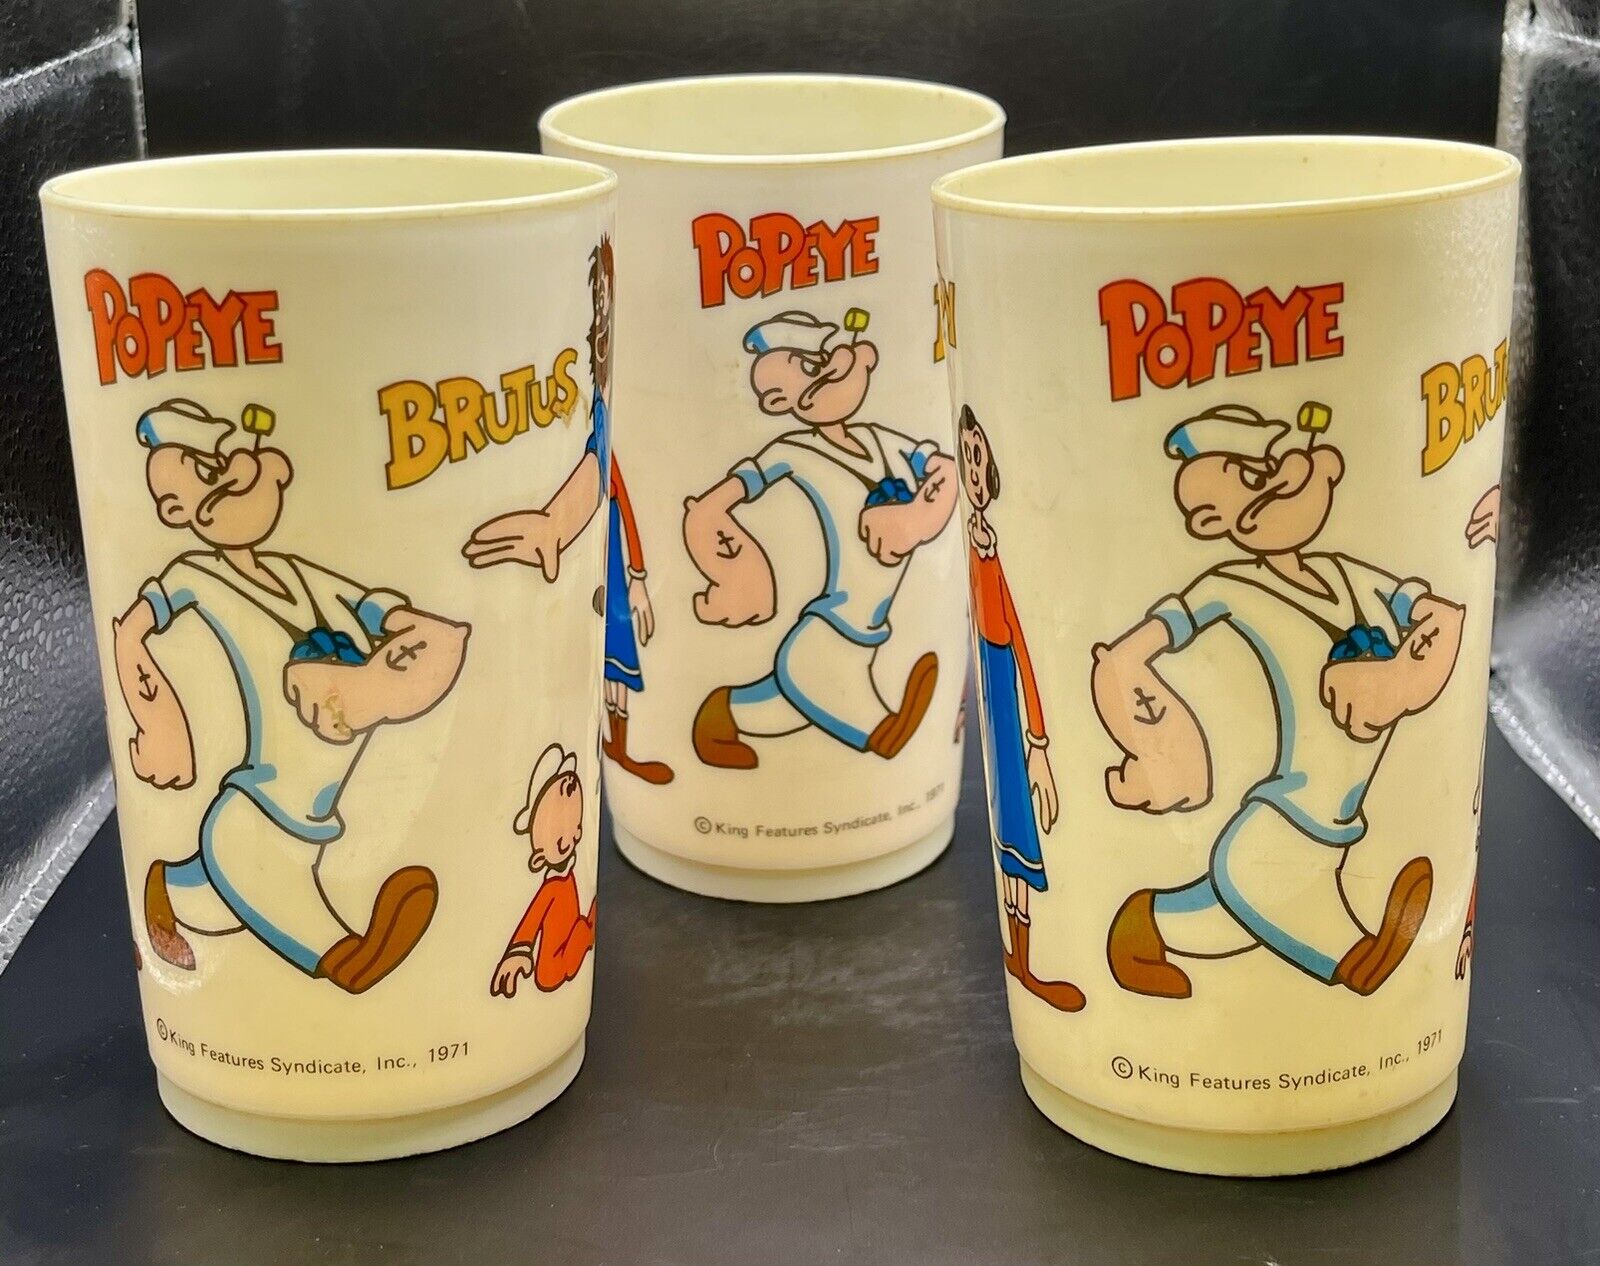 1971 King Features Syndicate Inc. Plastic Popeye Glasses